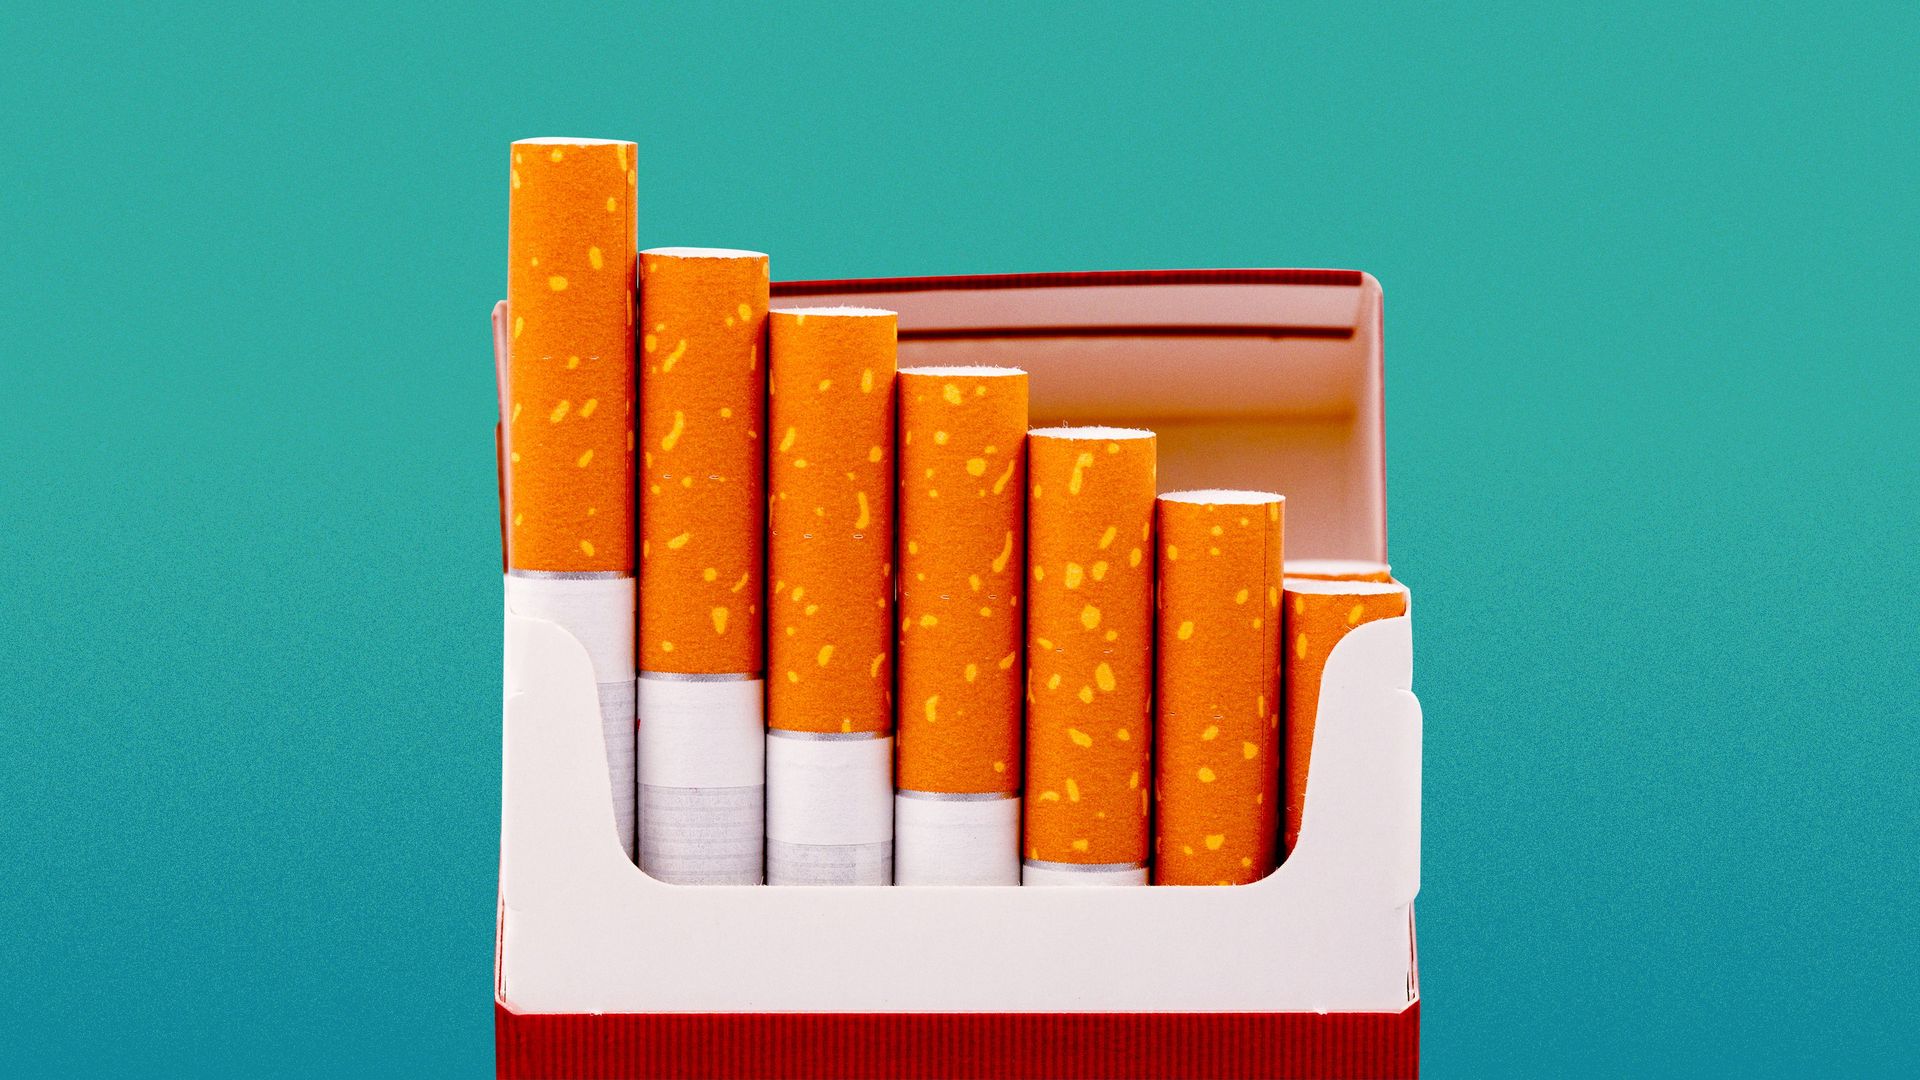 Illustration of a pack of cigarettes as a downward trending bar chart.